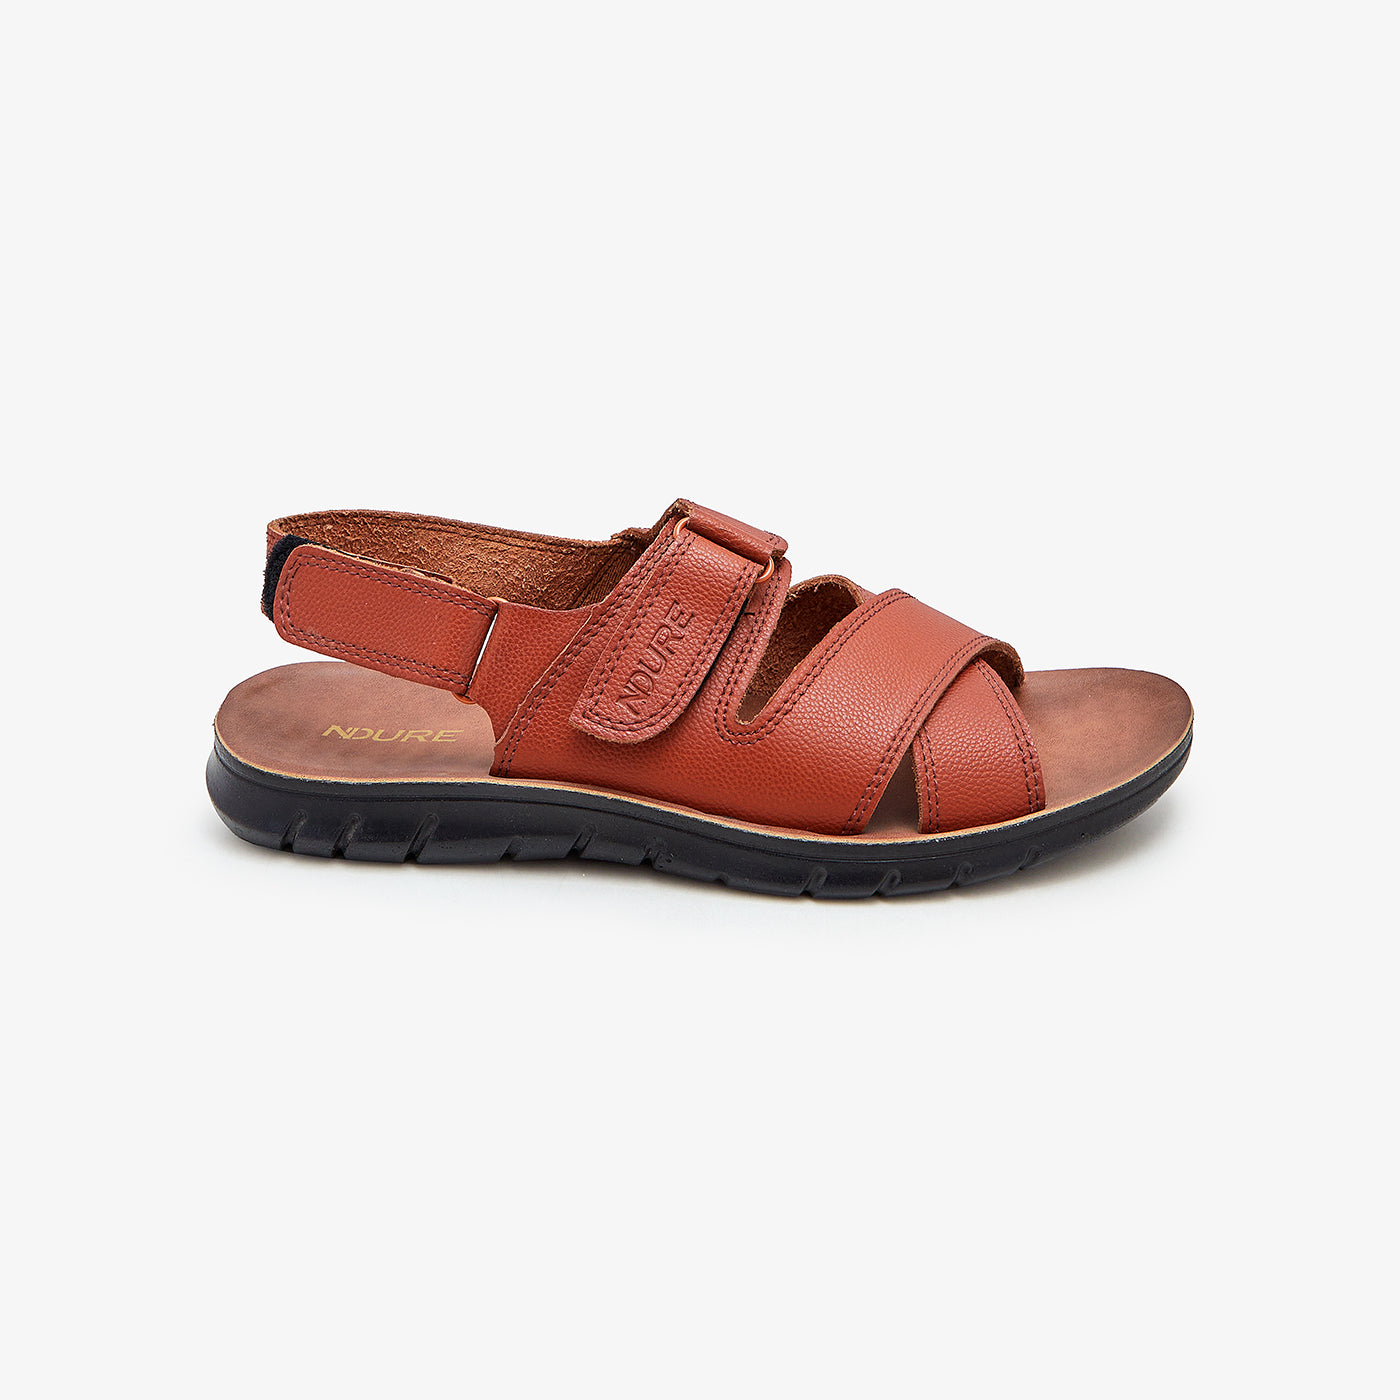 Men's Perforated Strap Sandals